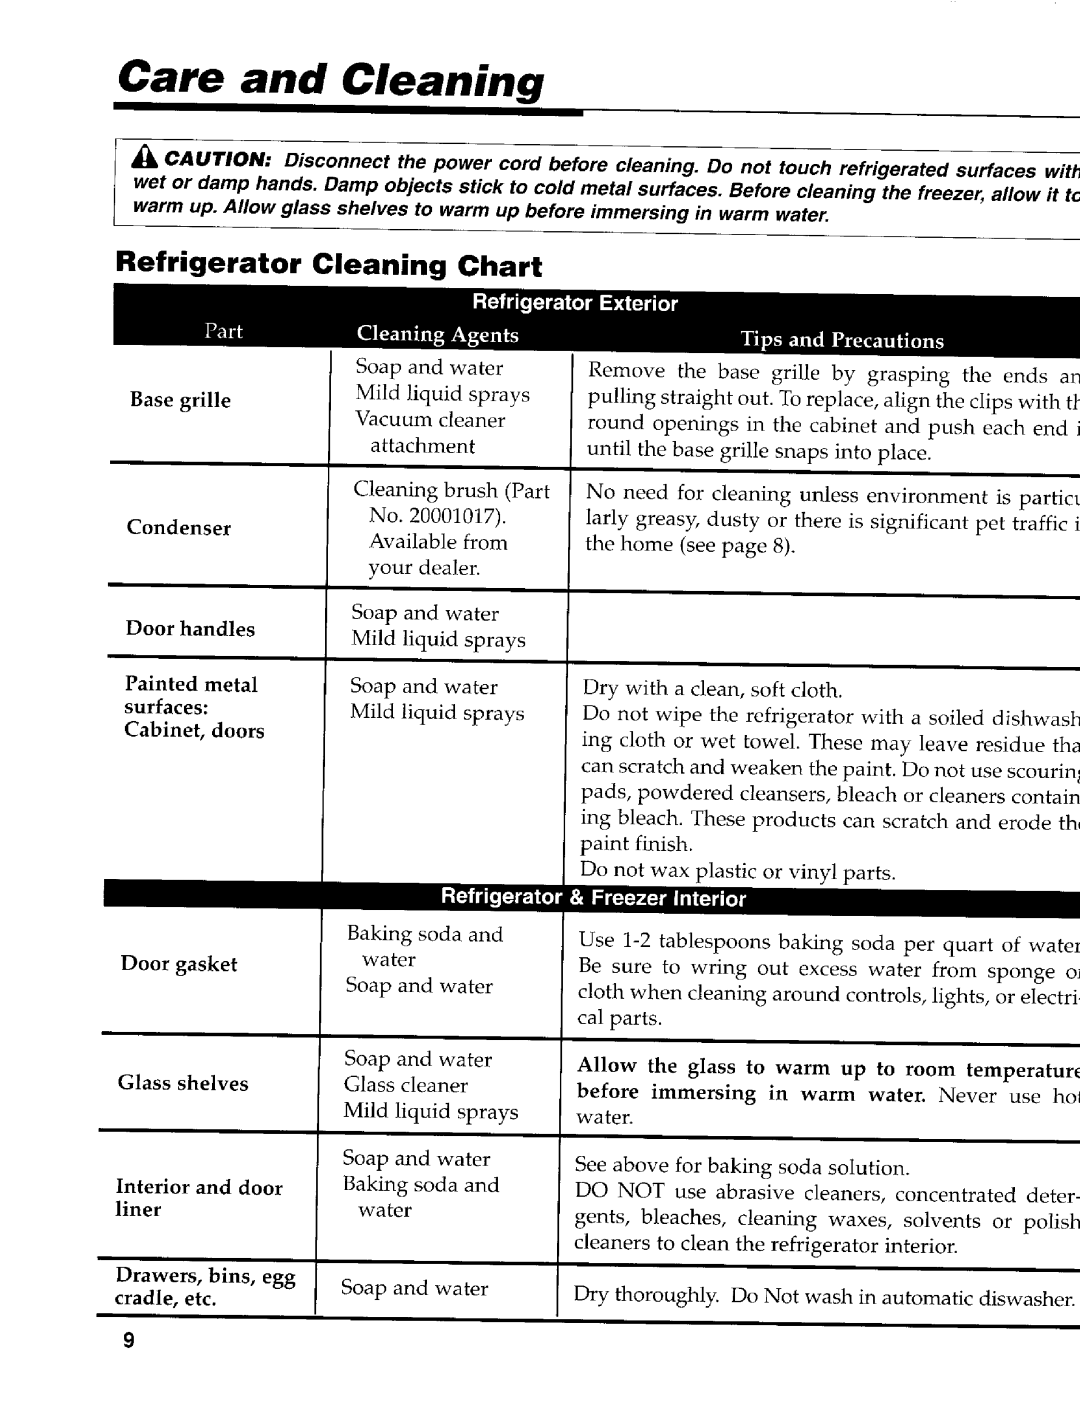 Maytag 111208-1, 61005031 warranty Condenser, cradle, etc, Care and Cleaning, Refrigerator Cleaning Chart 